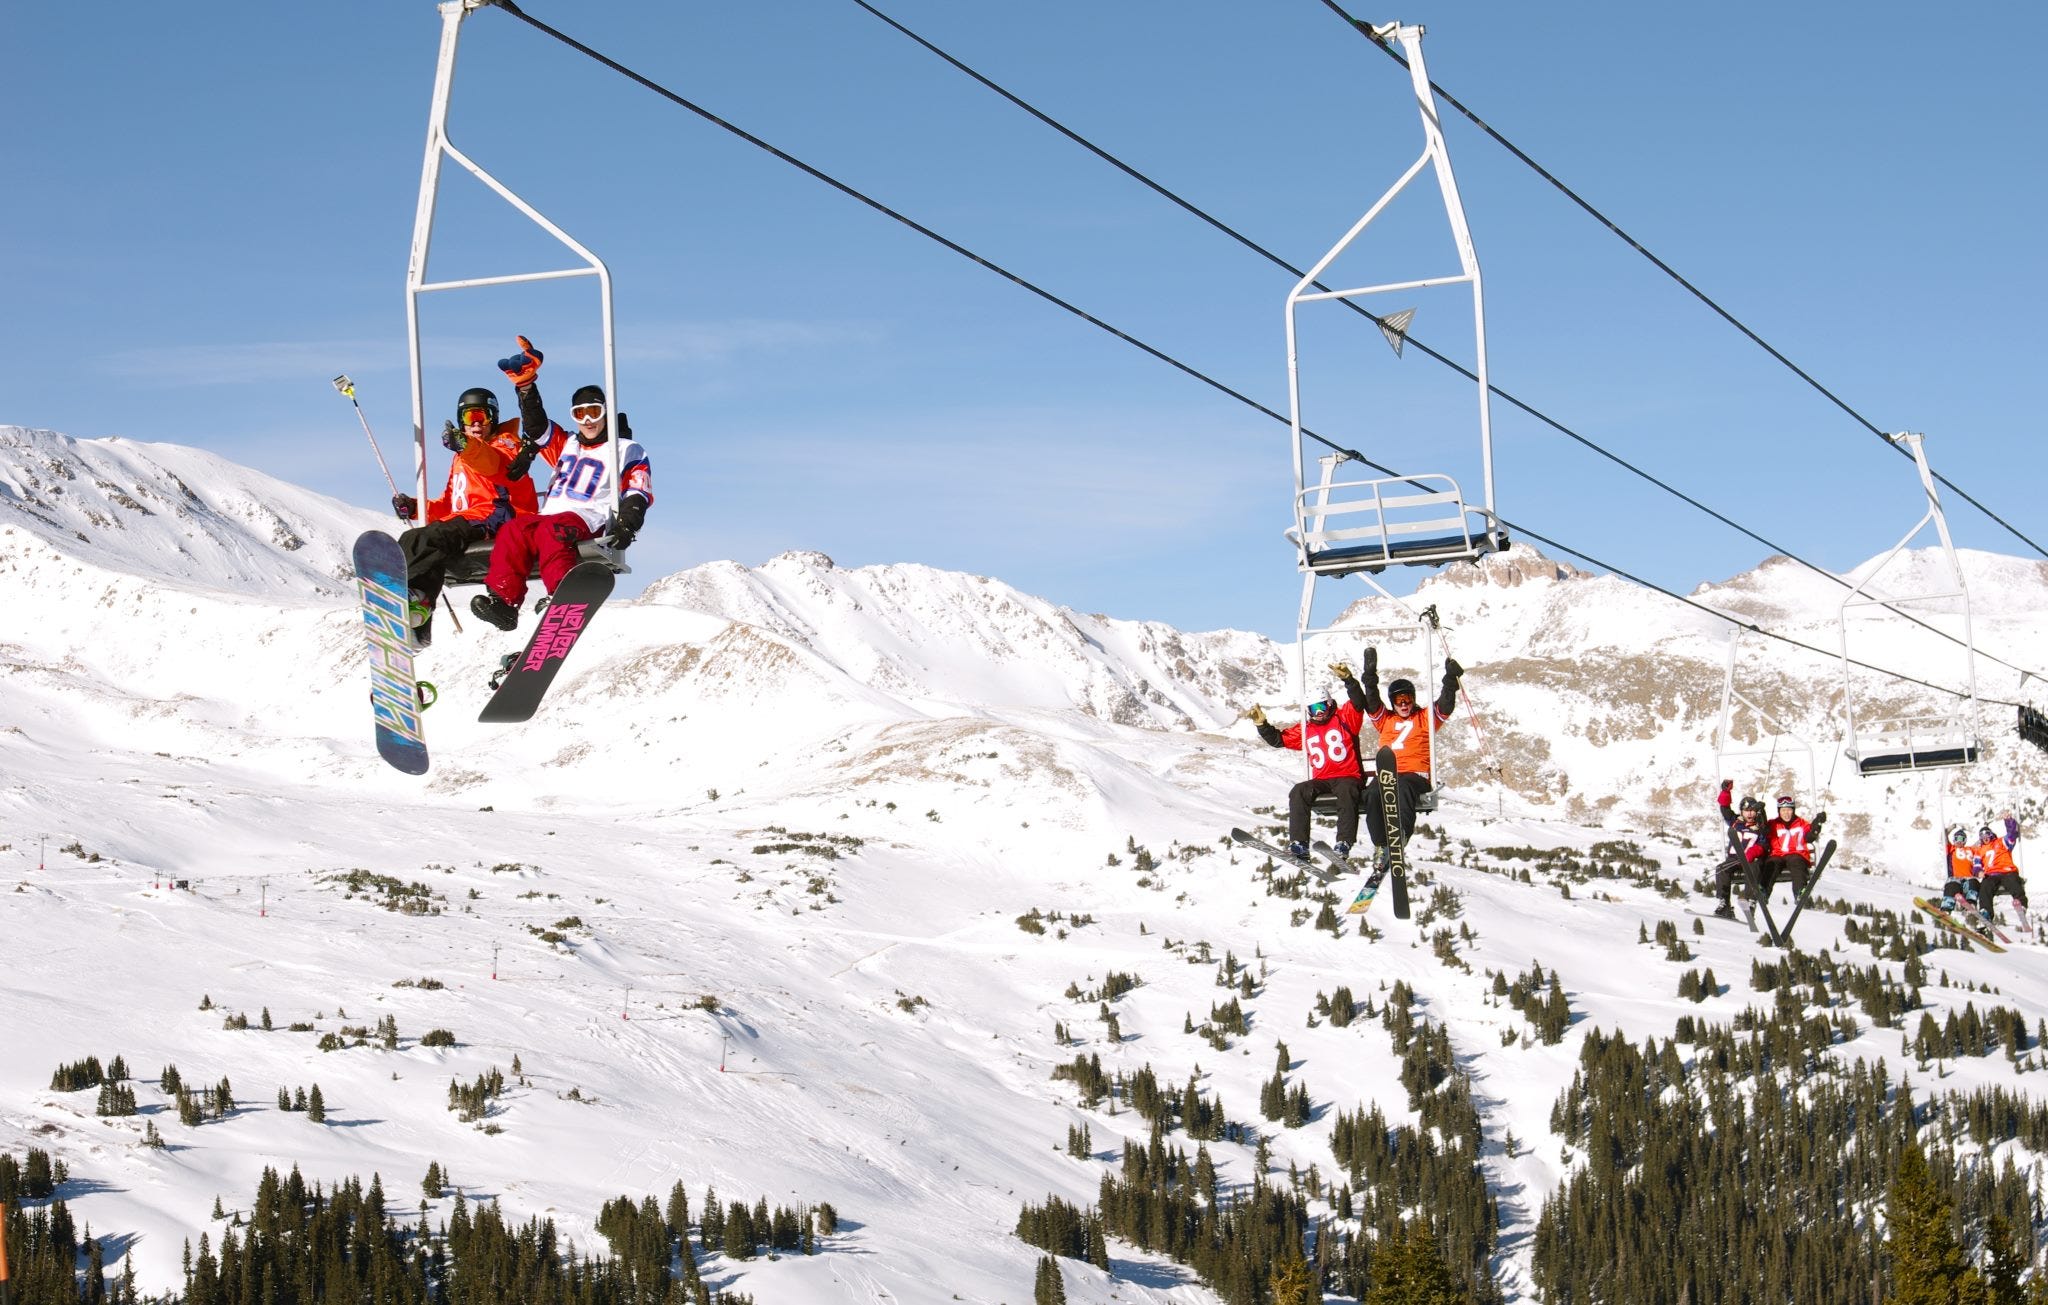 riders zip up Loveland Ski area on Chair 6, with a blue sky and snow-capped peaks in the background